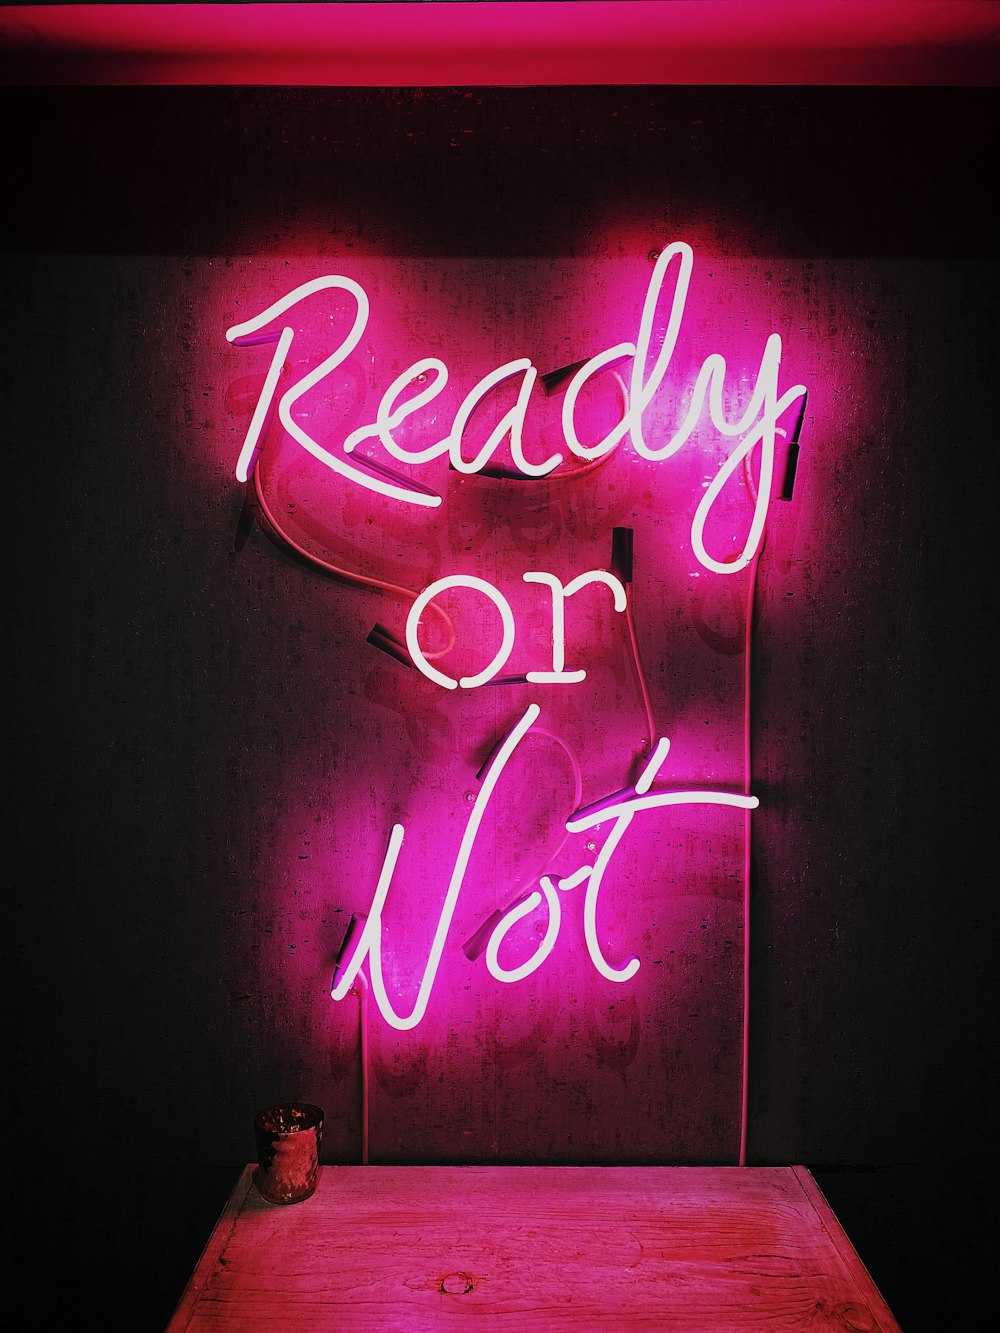 Love Neon Pictures  Download Free Images on Unsplash